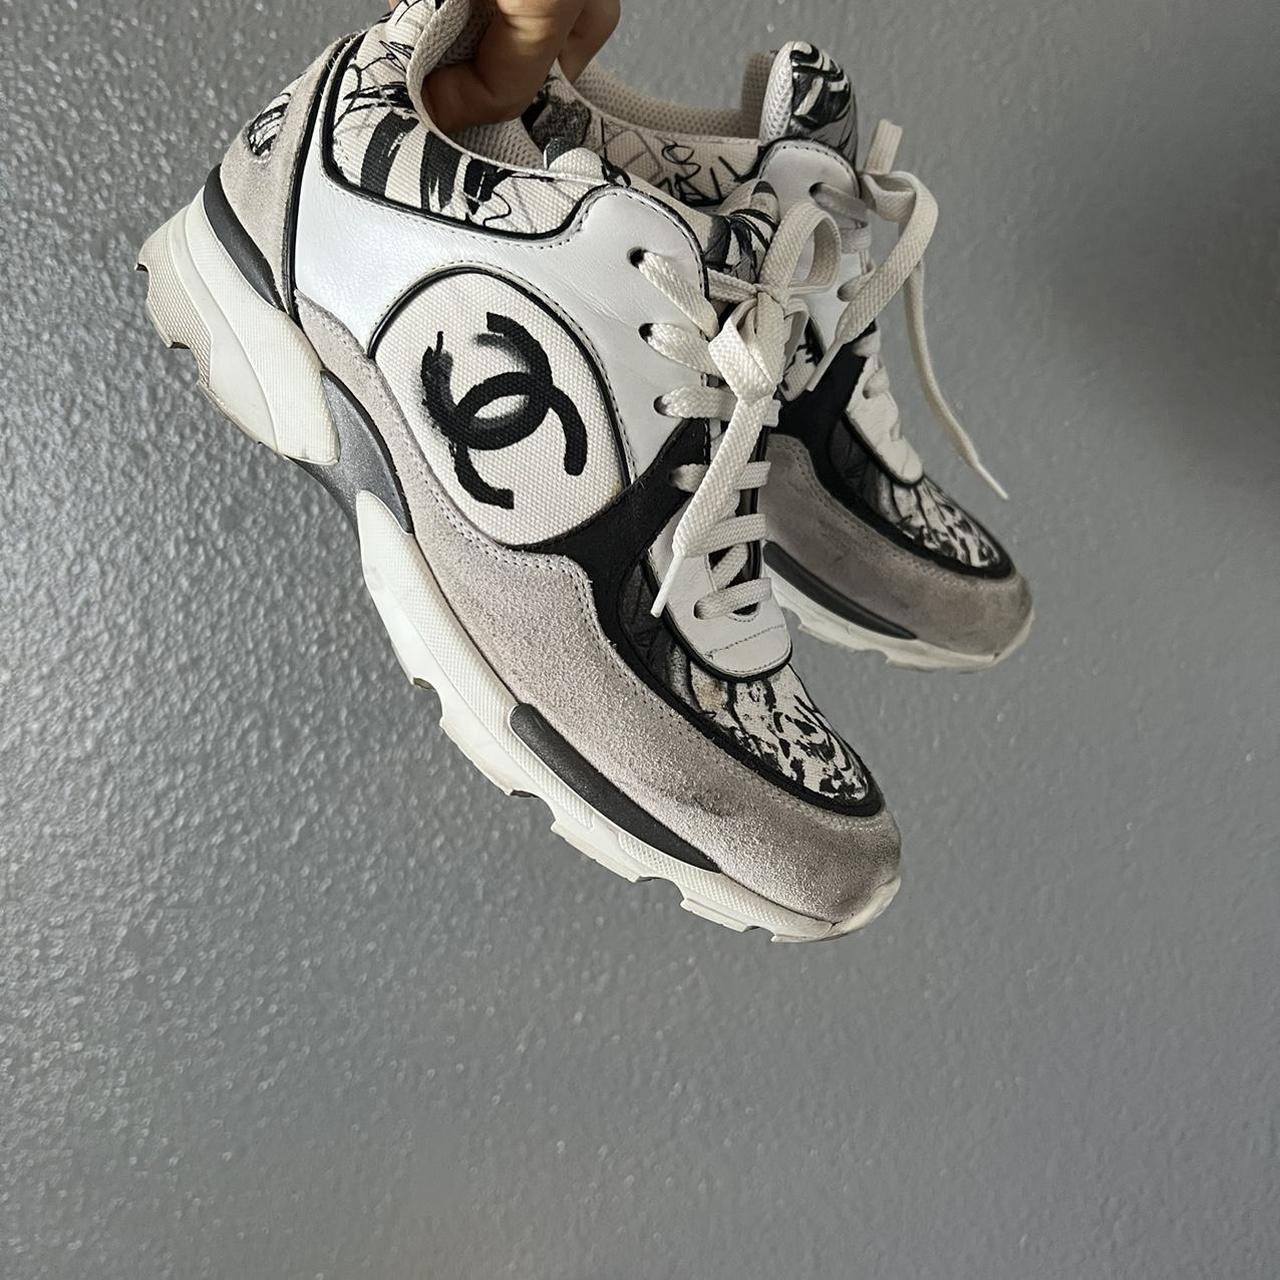 CHANEL SNEAKERS White /Black /Grey. They have been - Depop